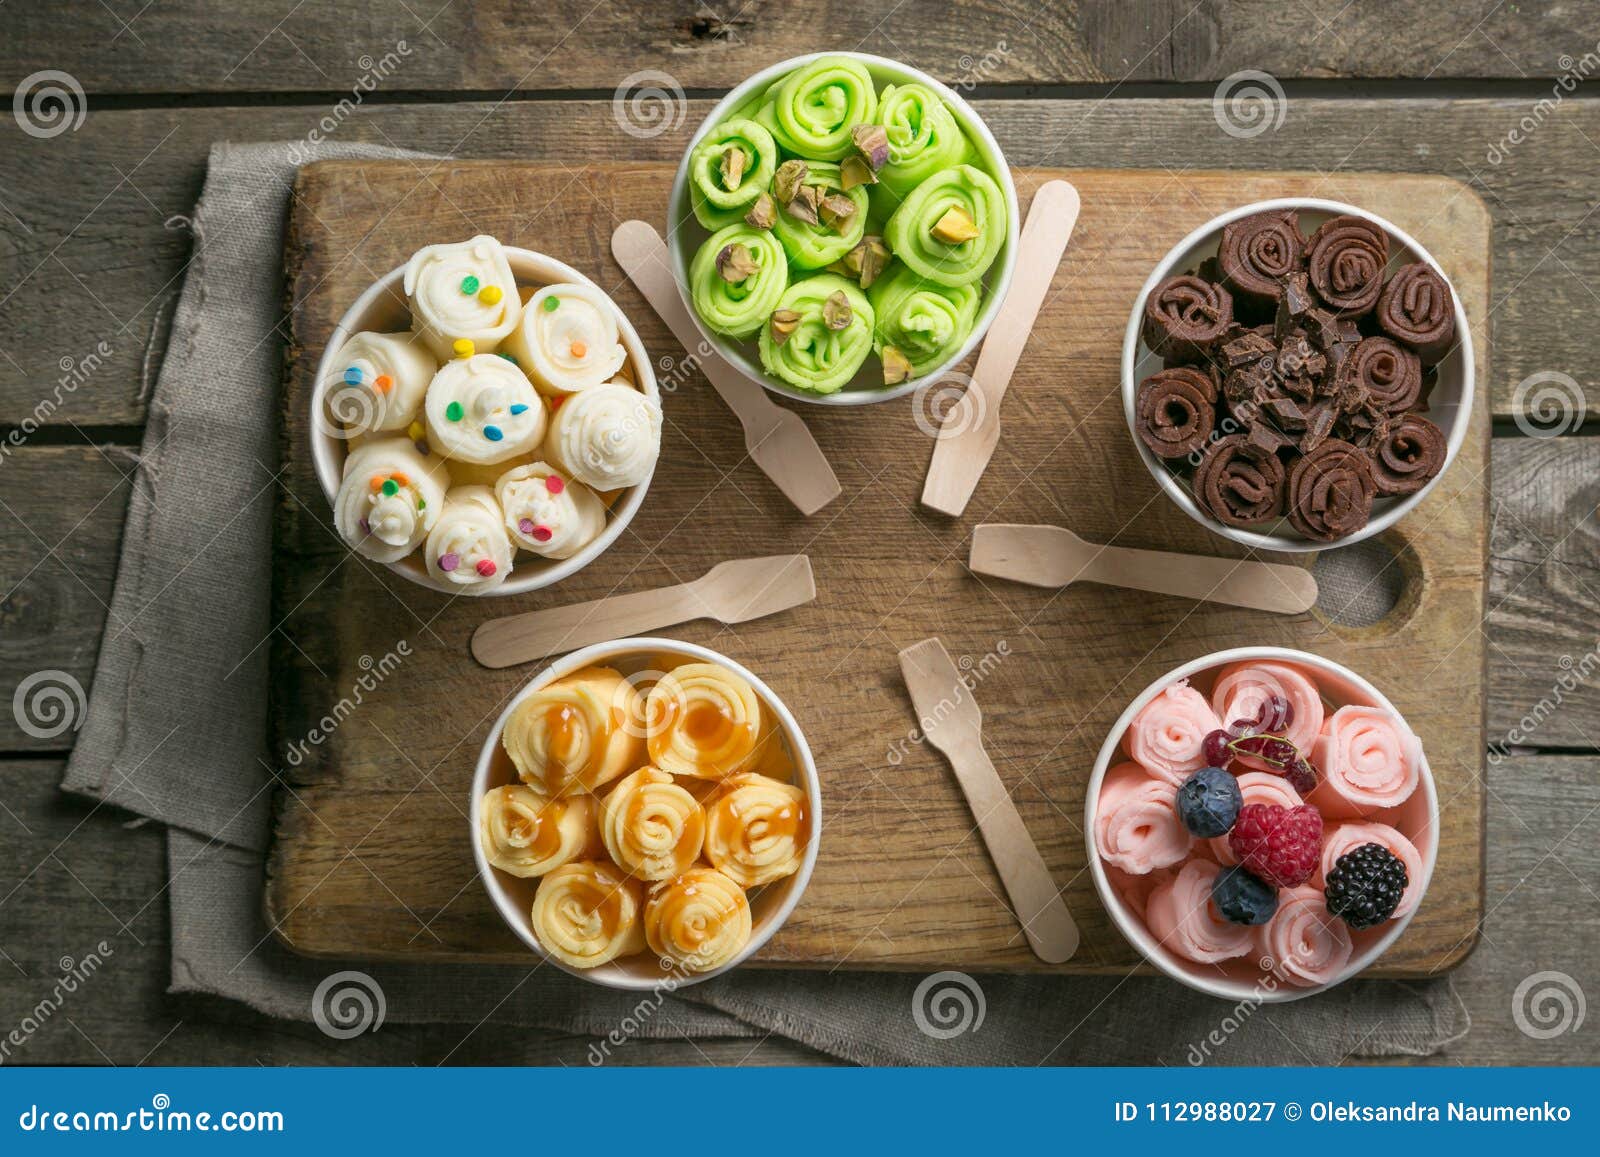 selection of different rolled ice creams in cone cups